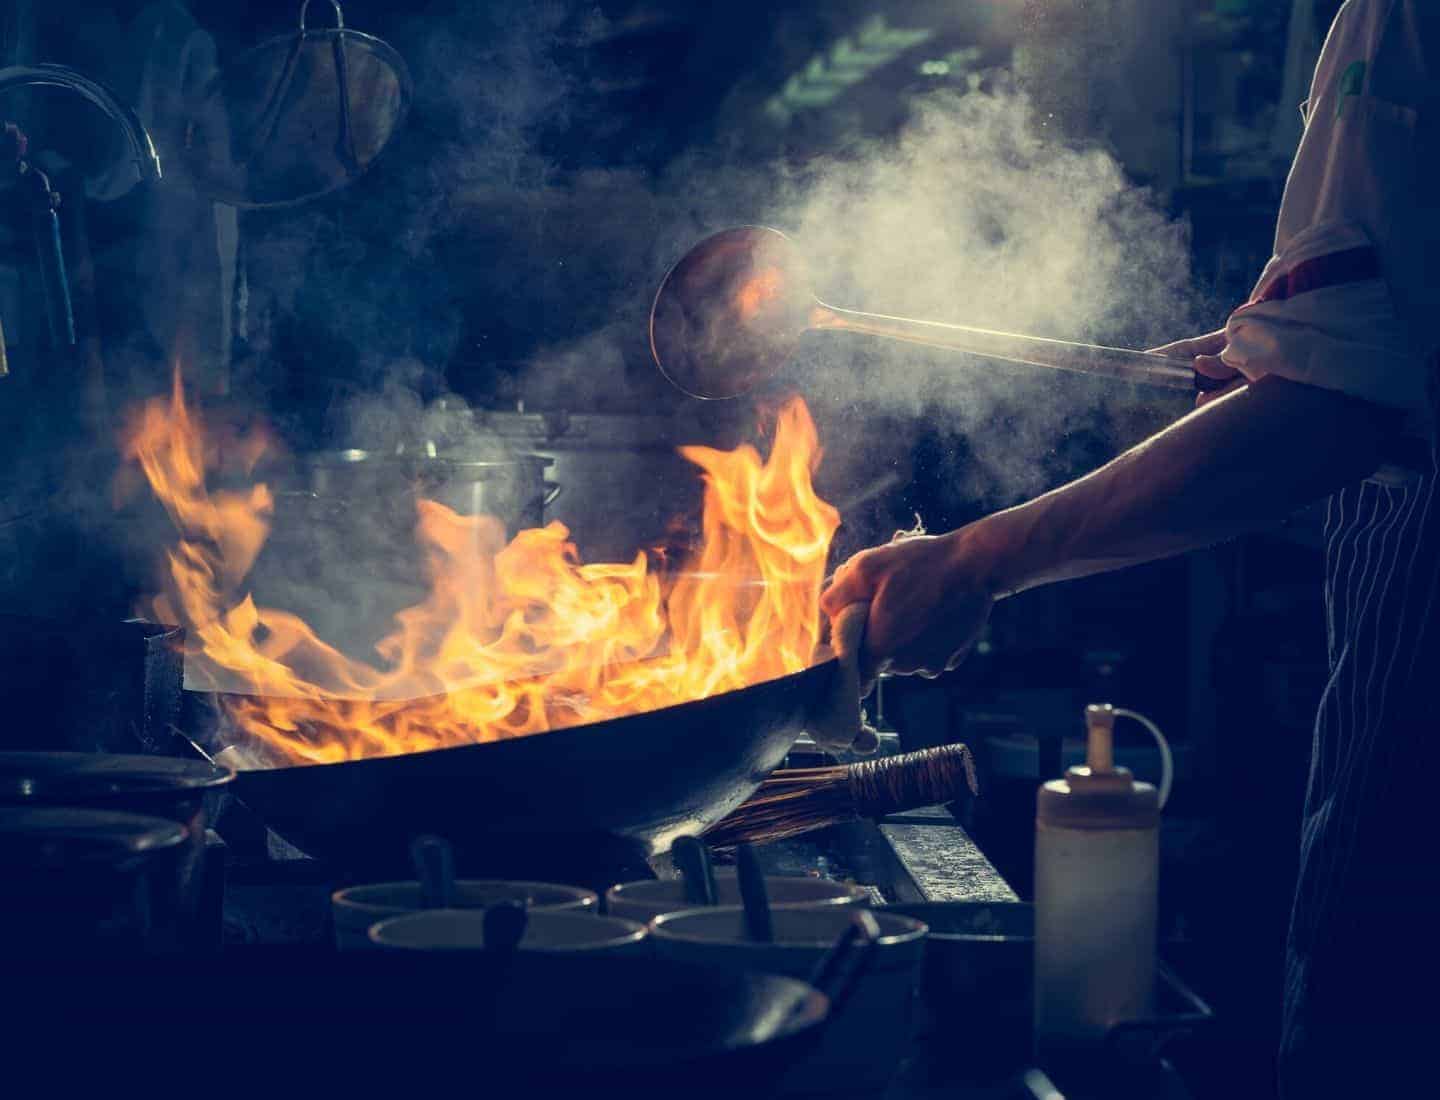 Man cooking with a wok that has been set on fire